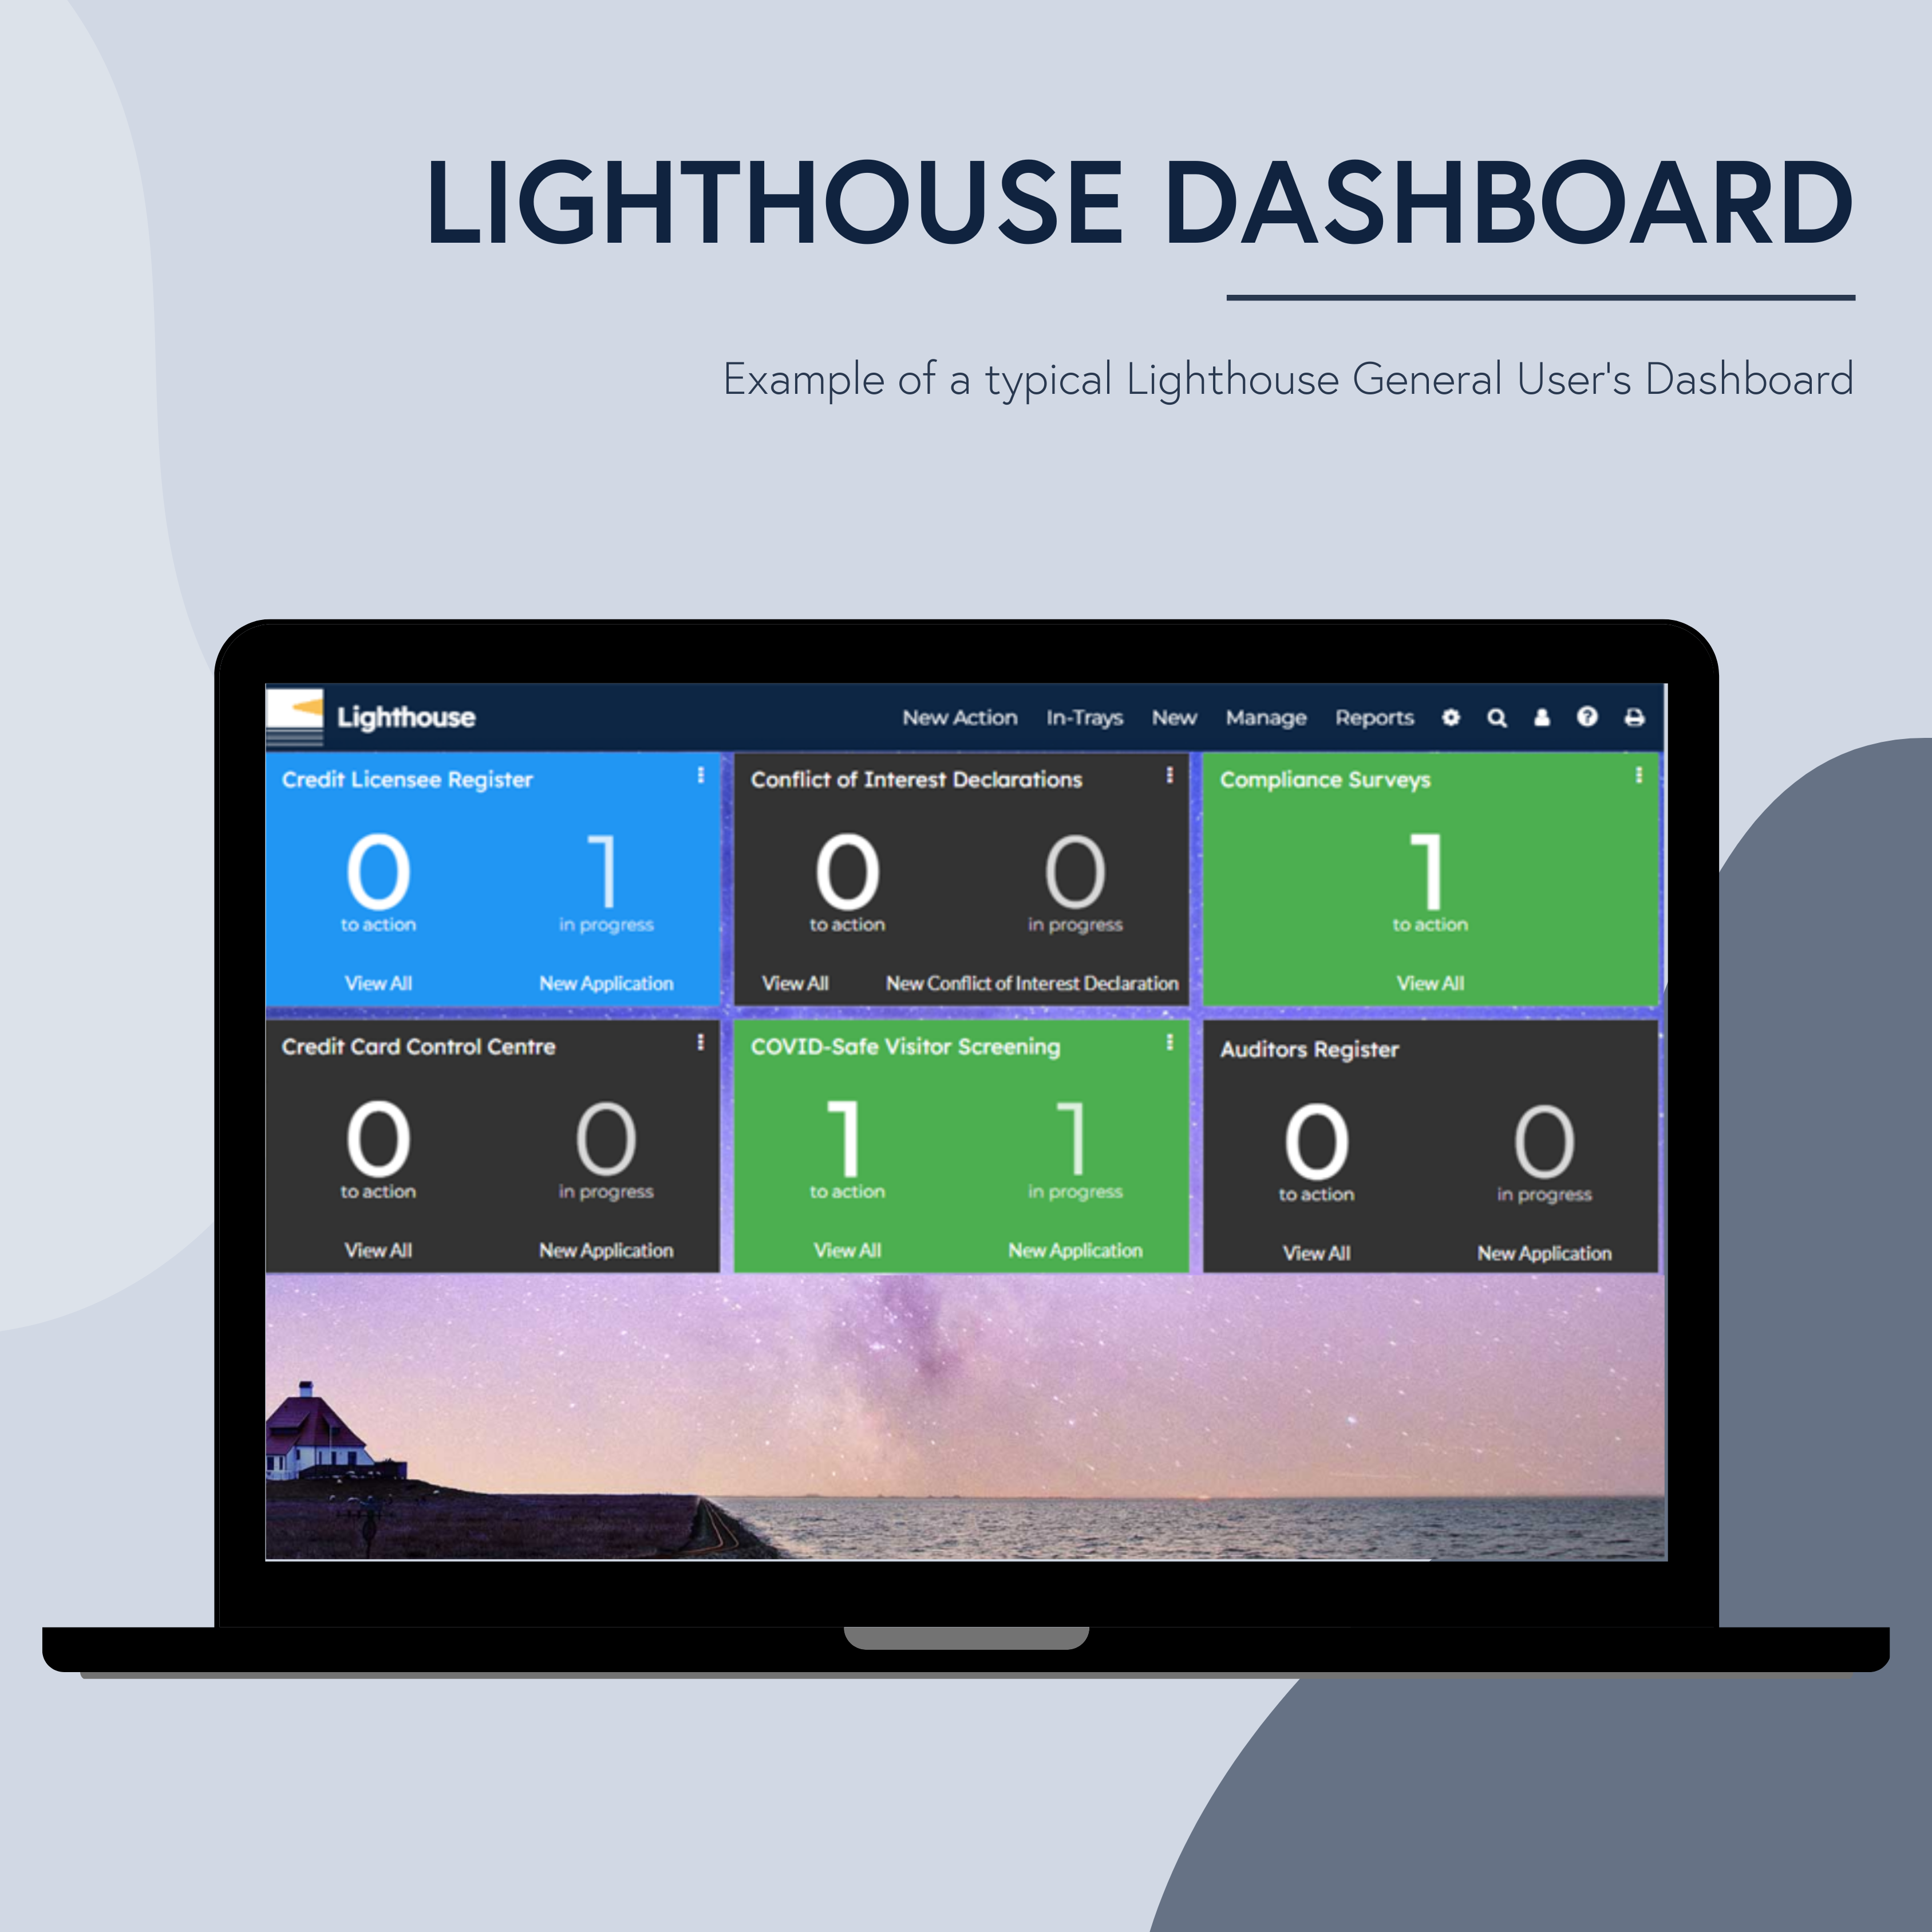 Example of a typical Lighthouse General User’s Dashboard